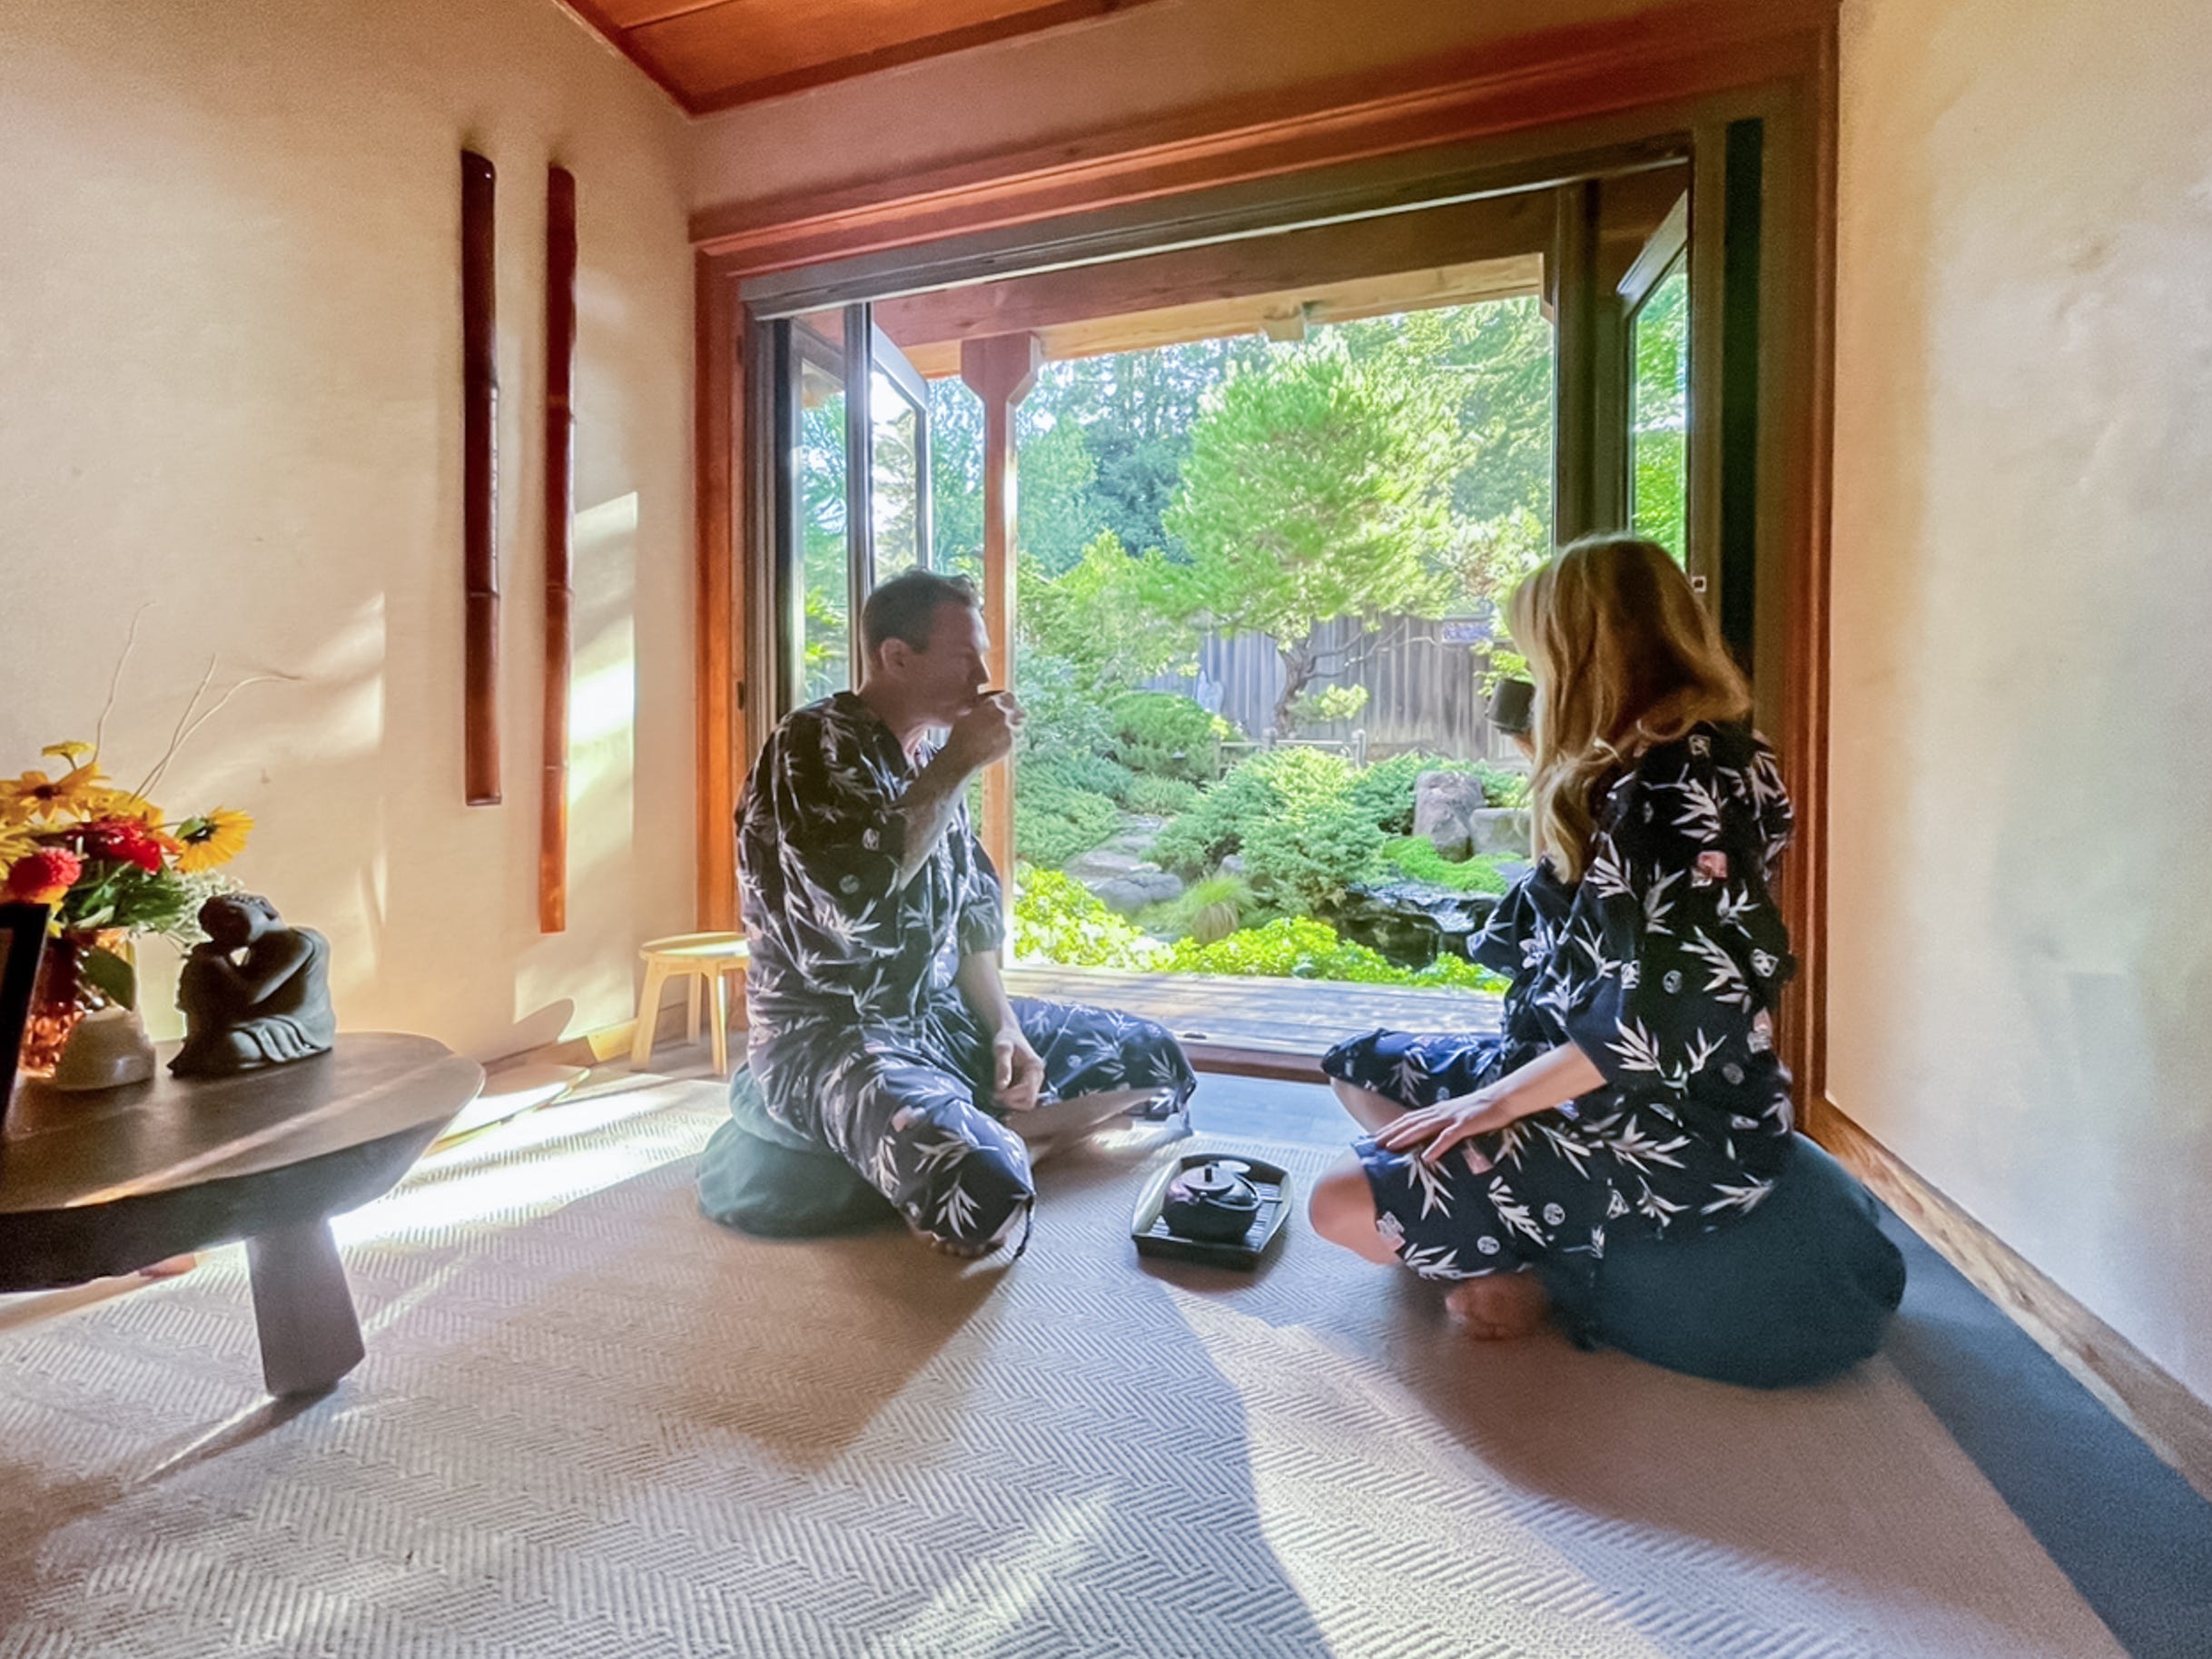 <p>When it comes to activities, "luxury travelers often have an affinity toward wellness-related experiences," Blotter told Insider. </p><p>Blotter added that there are plenty of spas with sustainable practices in place. </p><p>"Whether indulging in a luxe treatment, taking a yoga or meditation class, or learning how to live a healthier lifestyle through a guided cooking experience, luxury travelers can ensure their experience is sustainable," Blotter said.</p><p>Before selecting a spa, Blotter recommends checking the ingredients used in its treatments.</p><p>"For optimal sustainability, the ingredients and goods used in treatments or wellness workshops are locally sourced, organic, cruelty-free, fair-trade, and plant-based," she said.</p><p>She also recommends finding a place that conserves energy and has water-refill stations, filtered air, and recycling programs in place. </p><p>"Spas that have a focus on nature are also a bonus in helping to connect travelers more deeply with the healing found in nature," she added.</p><p>Blotter recommends <a href="https://www.osmosis.com/" rel="noopener">Osmosis Day Spa</a> in Sonoma County. The spa's <a href="https://www.osmosis.com/about/sustainability/">website</a> says it's dedicated to recycling and composting, uses eco-conscious products for treatments, and conserves water by recycling gray water. </p>